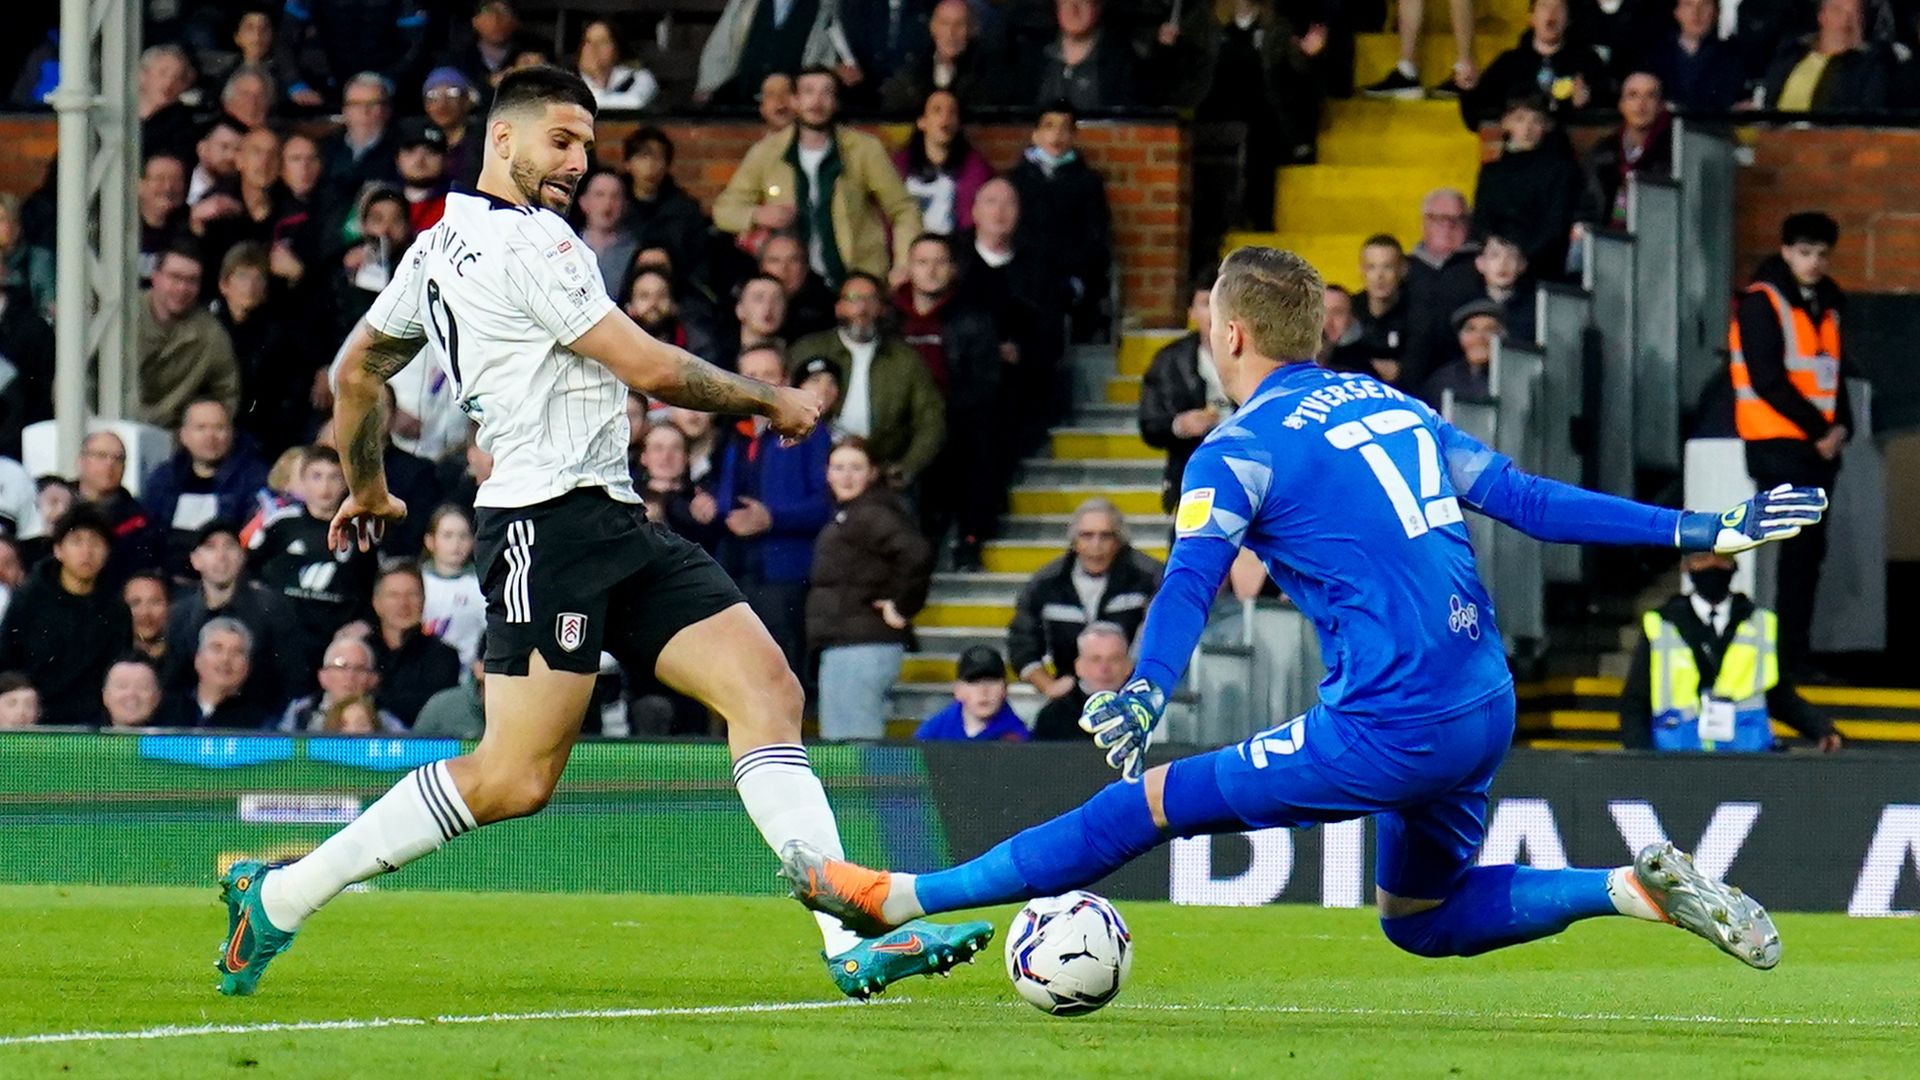 EFL: Fulham lead 2-0 as they close on promotion to PL LIVE!